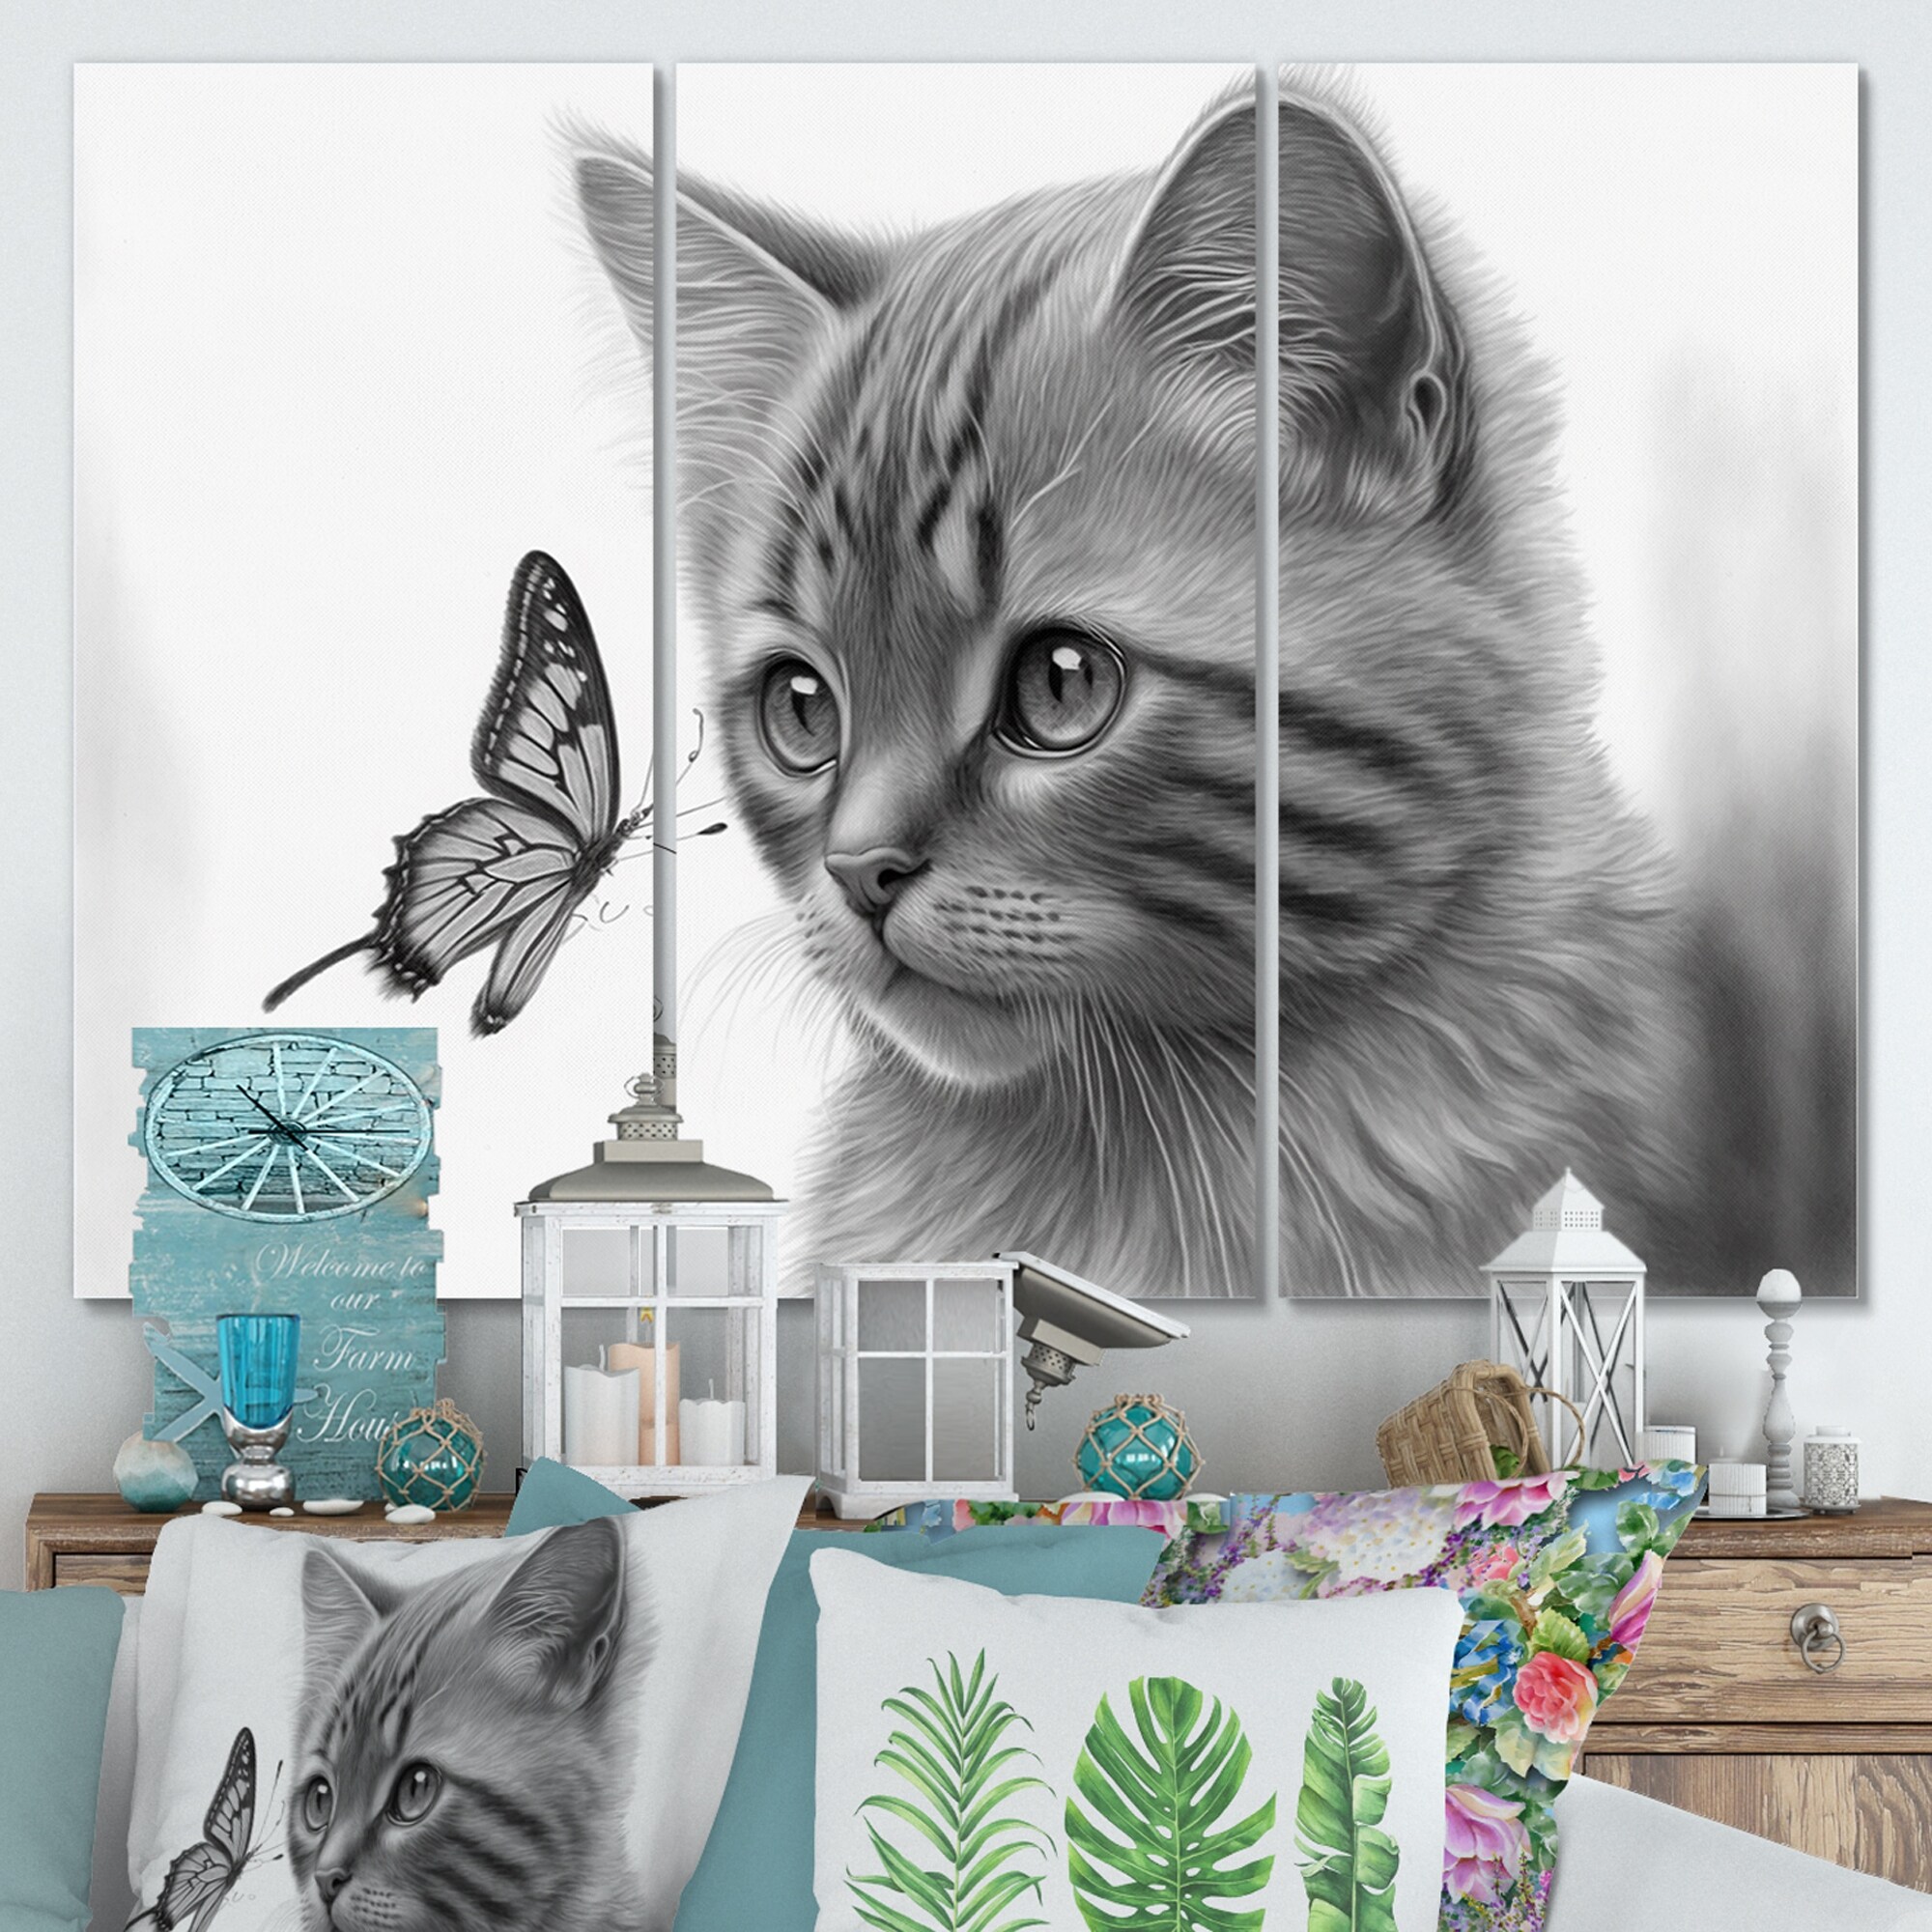 Cat Watching Butterfly | ClipArt ETC